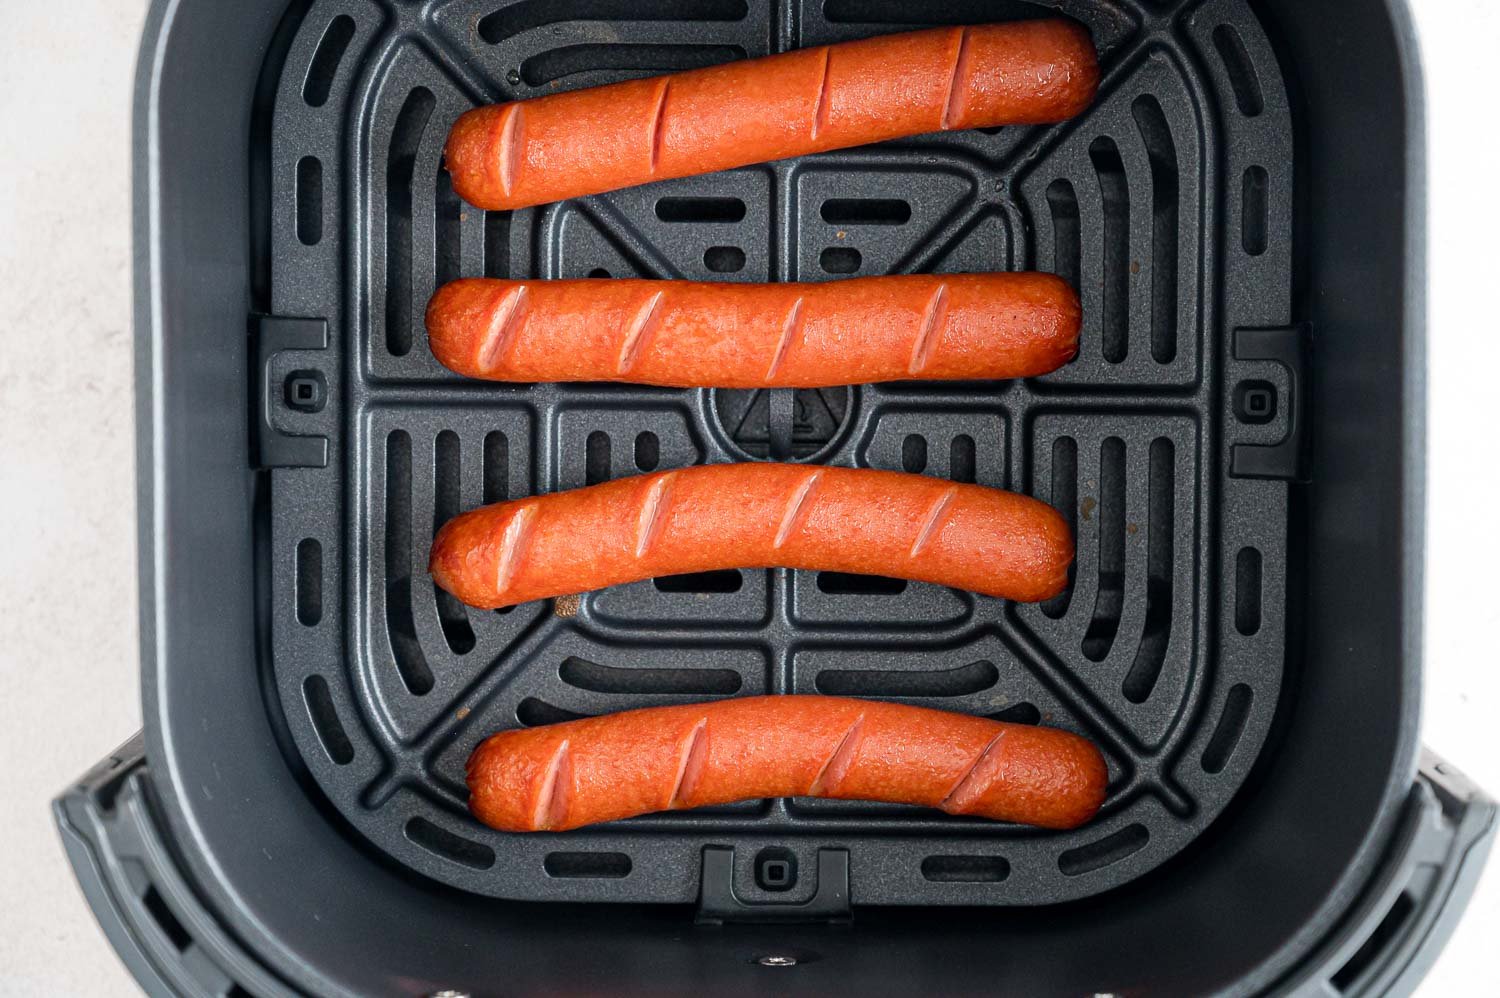 Cooked hot dogs in the air fryer basket.